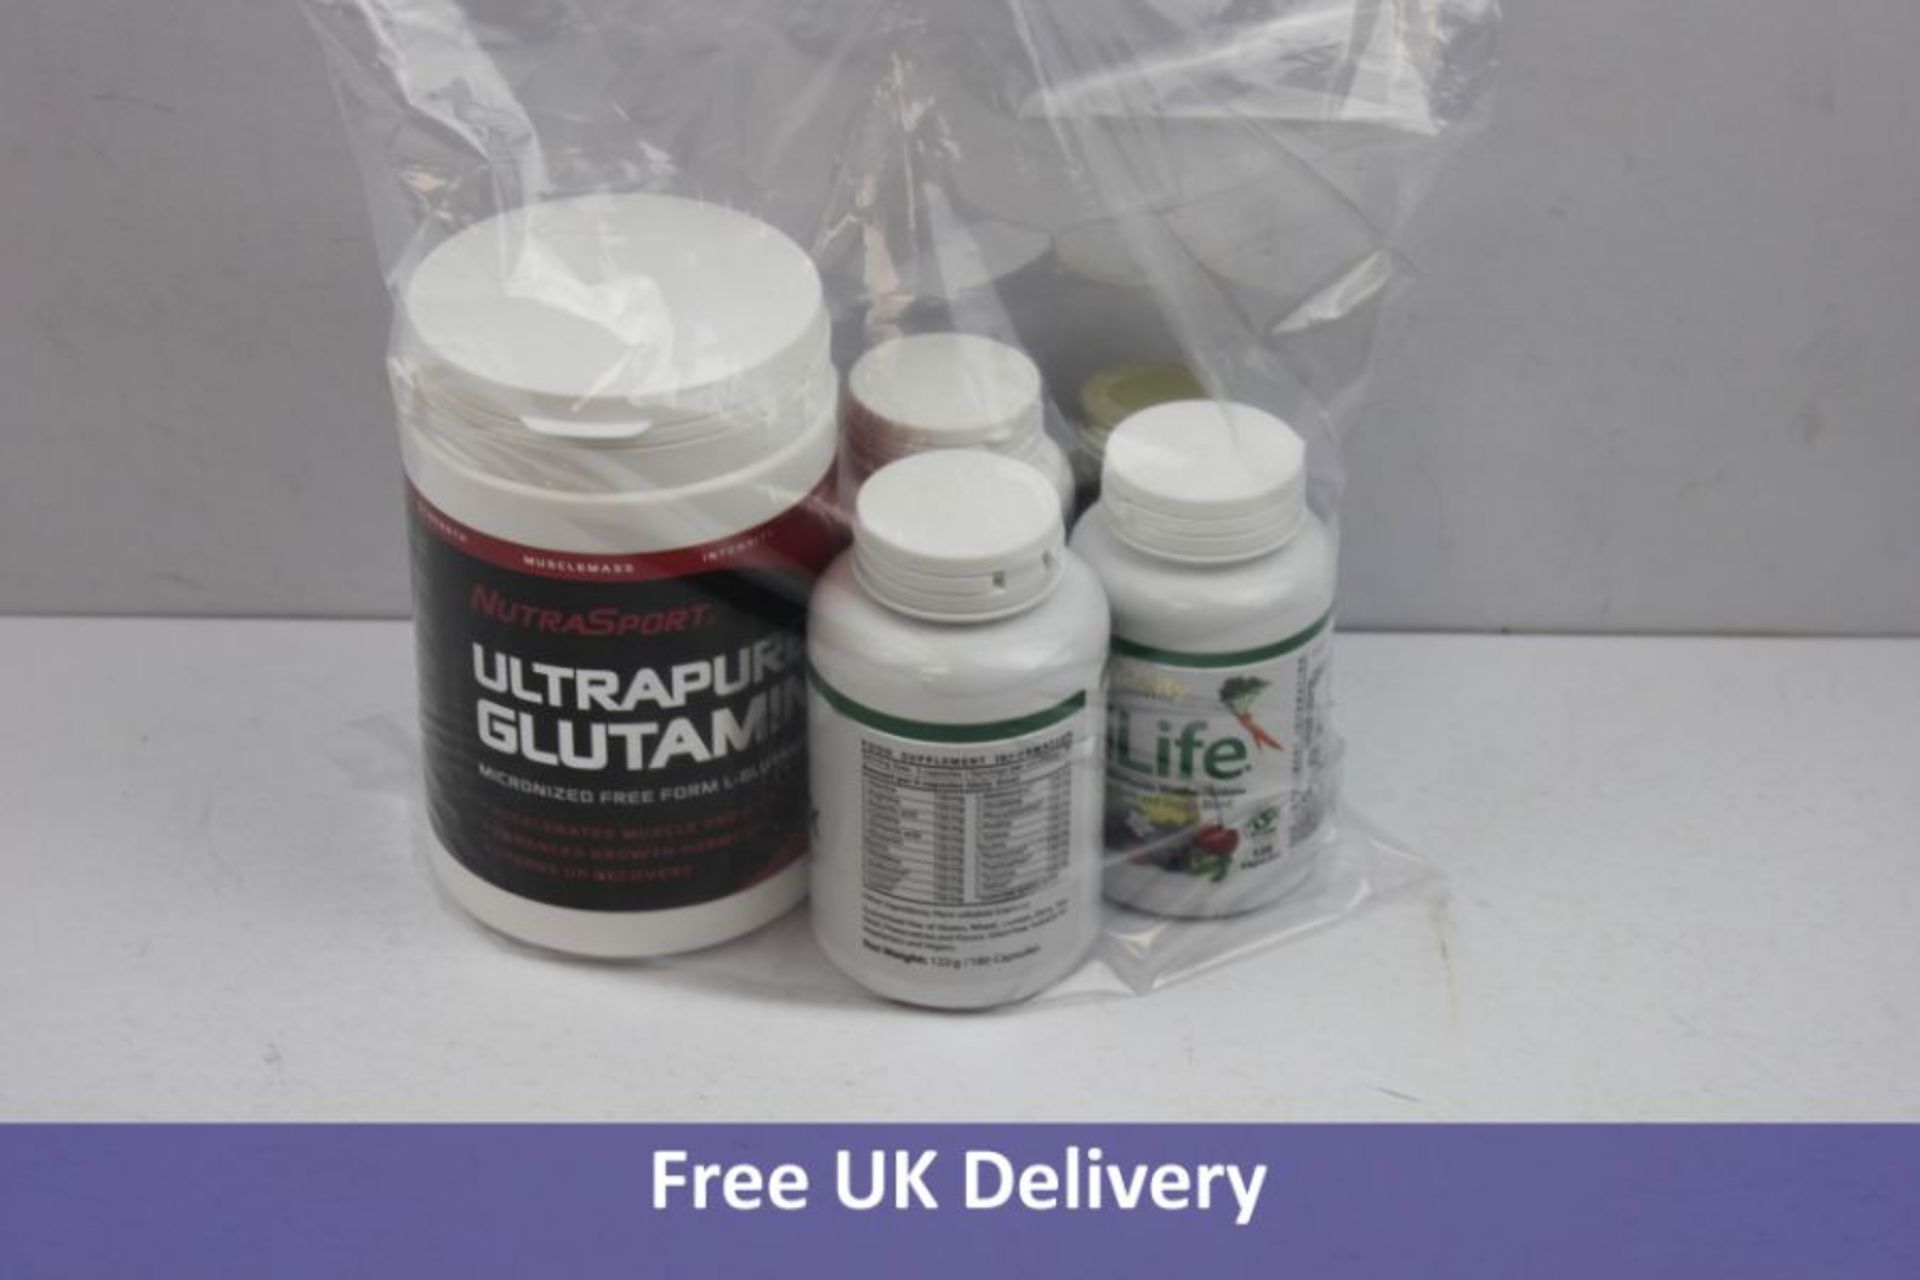 Six Items of Supplements to Include 1x Nutra Sport Ultra Pure Glutamine 500 G, Exp 06.22, 1x Vitalit